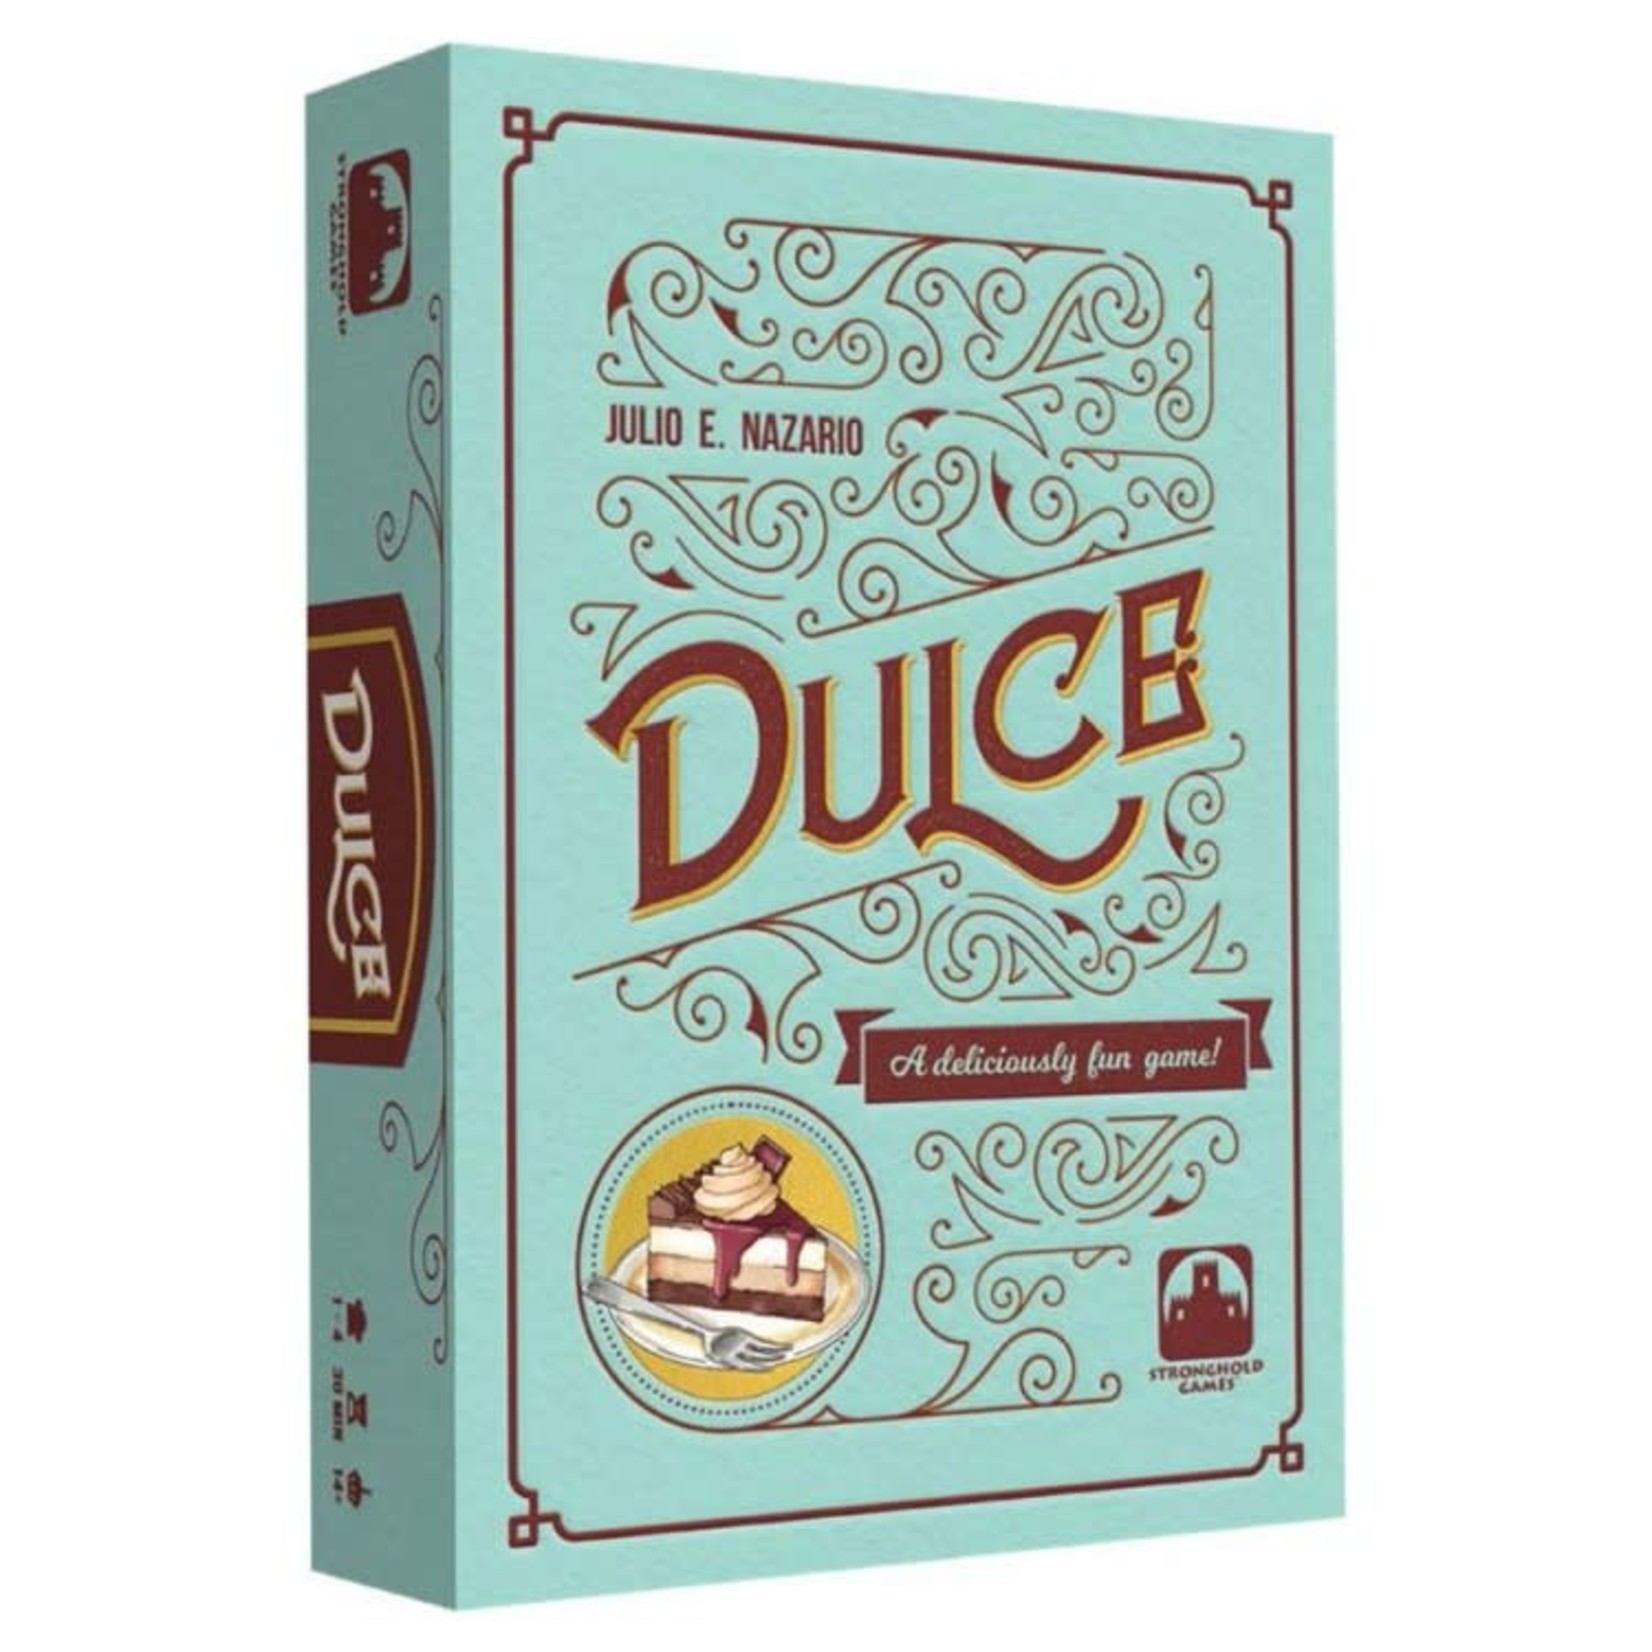 Stronghold Games Dulce